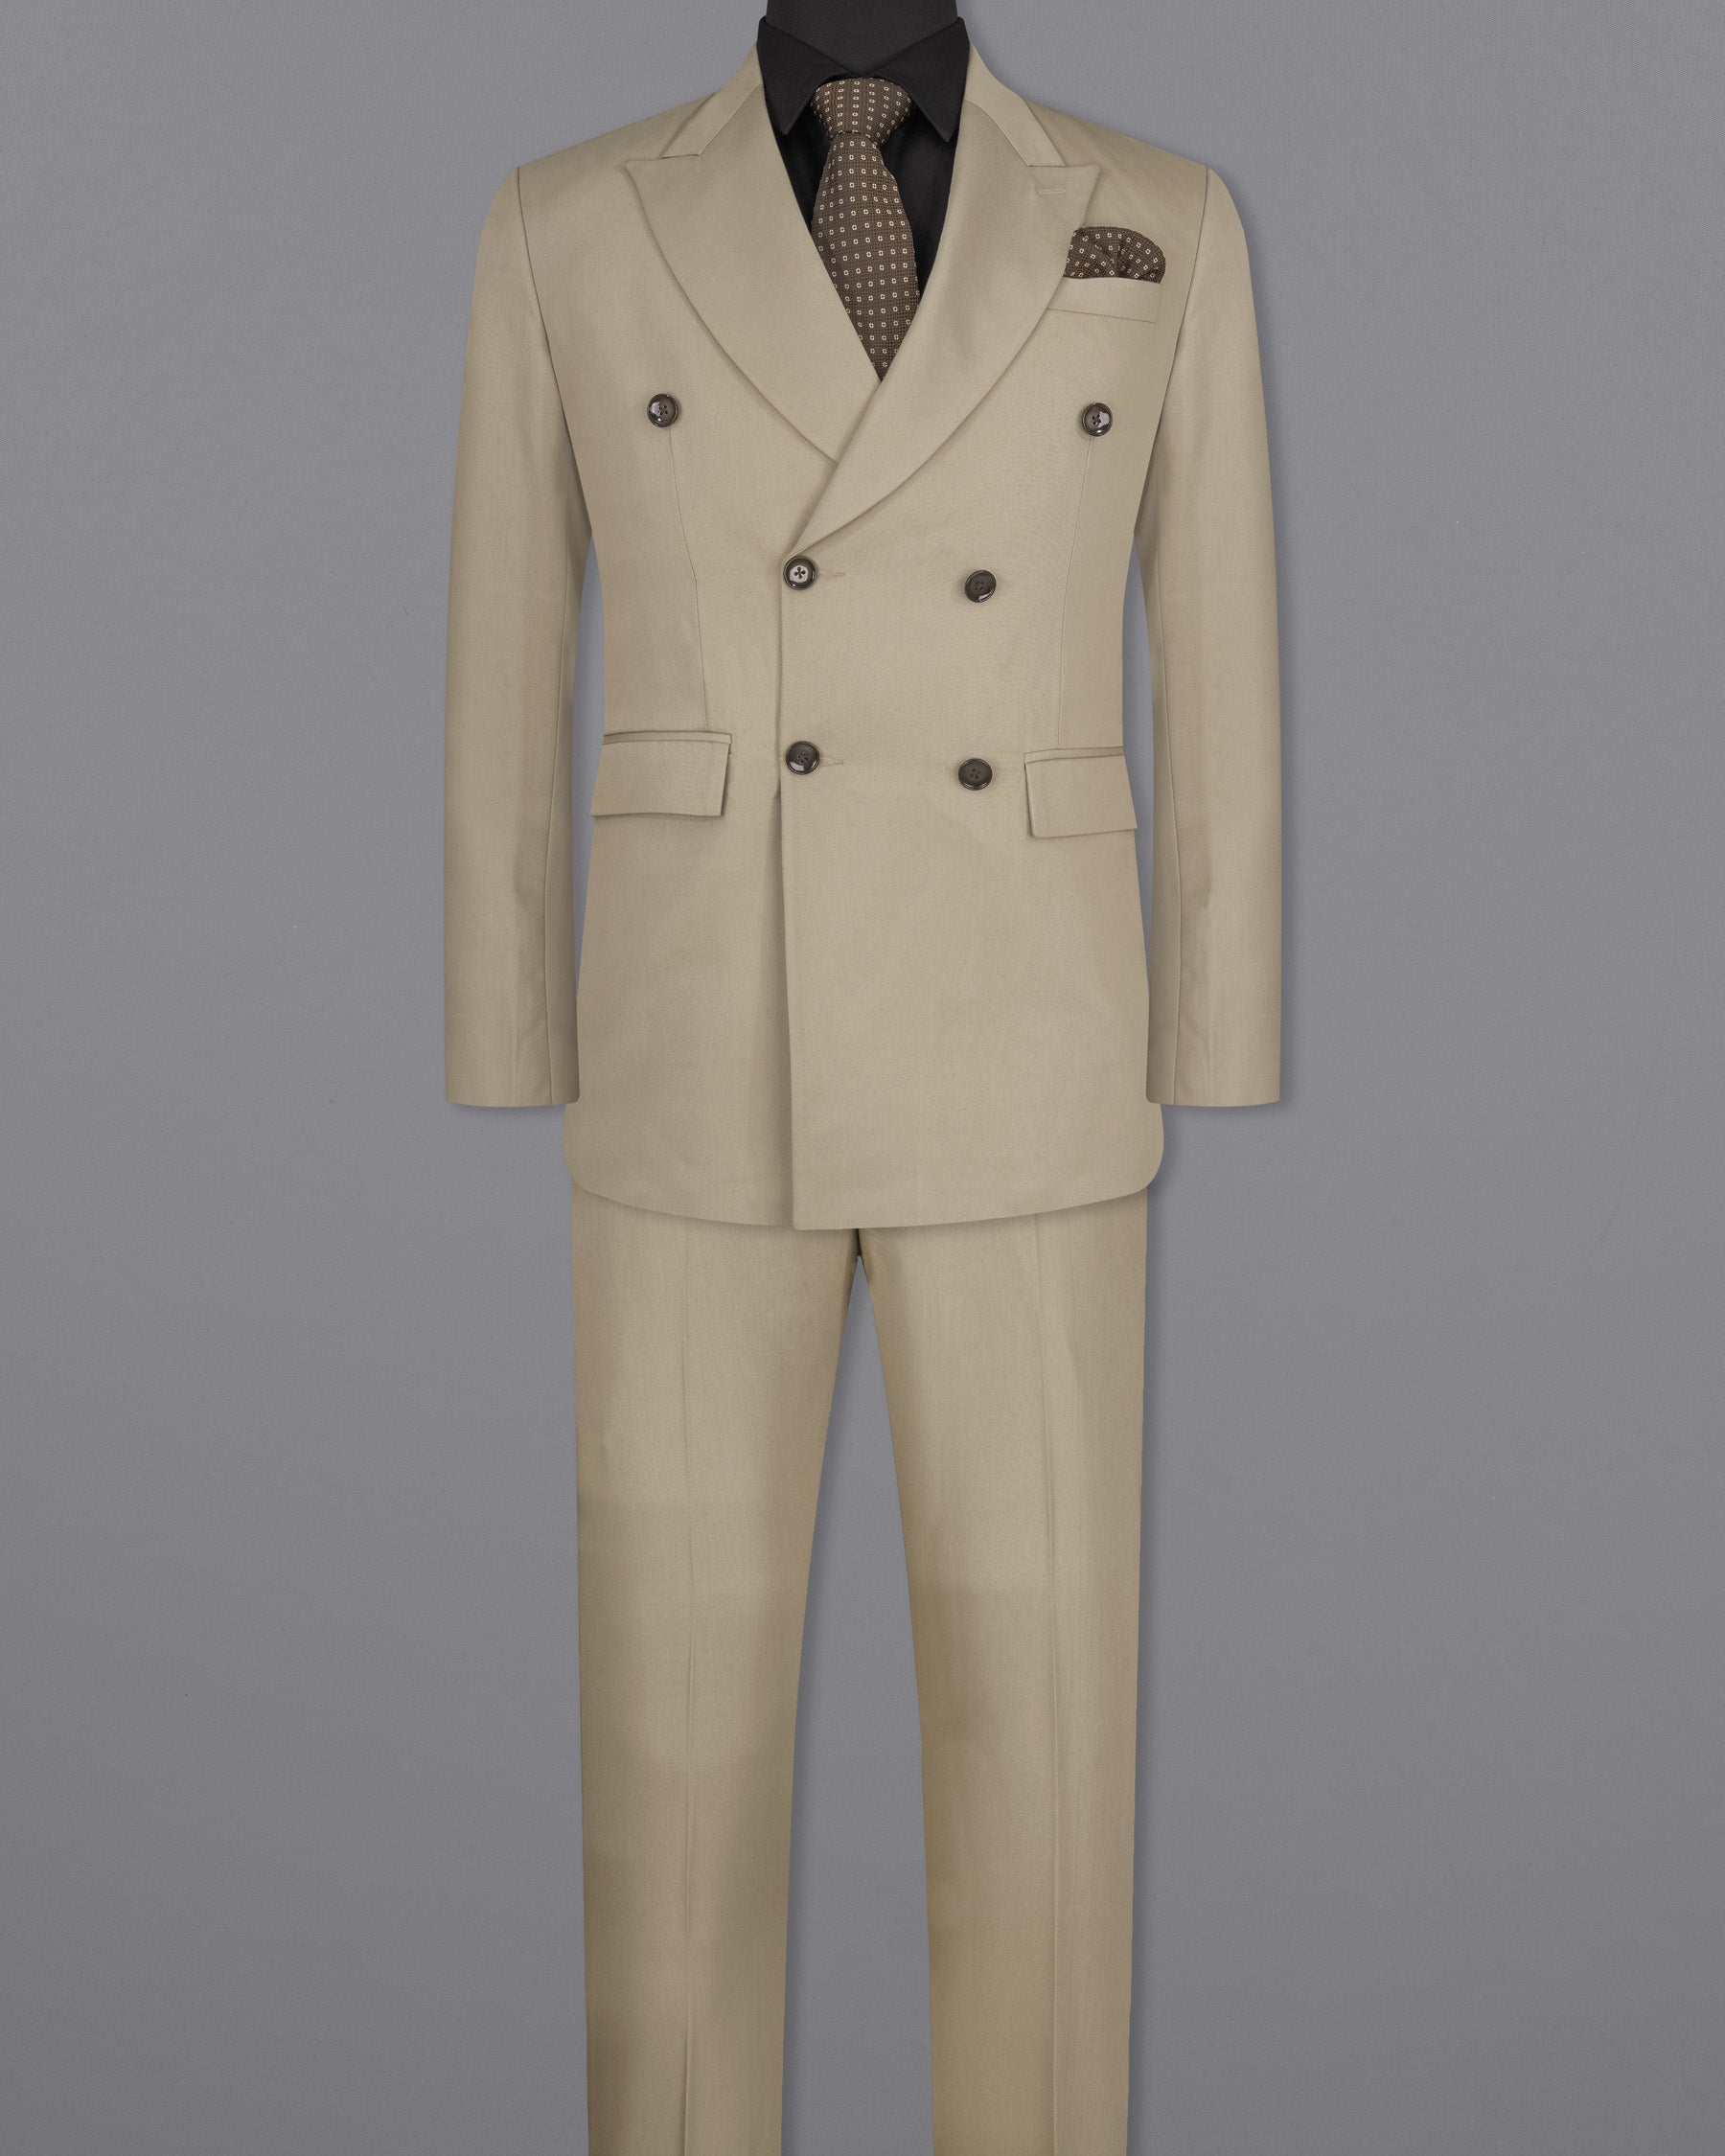 Hillary Light Brown Double Breasted Suit